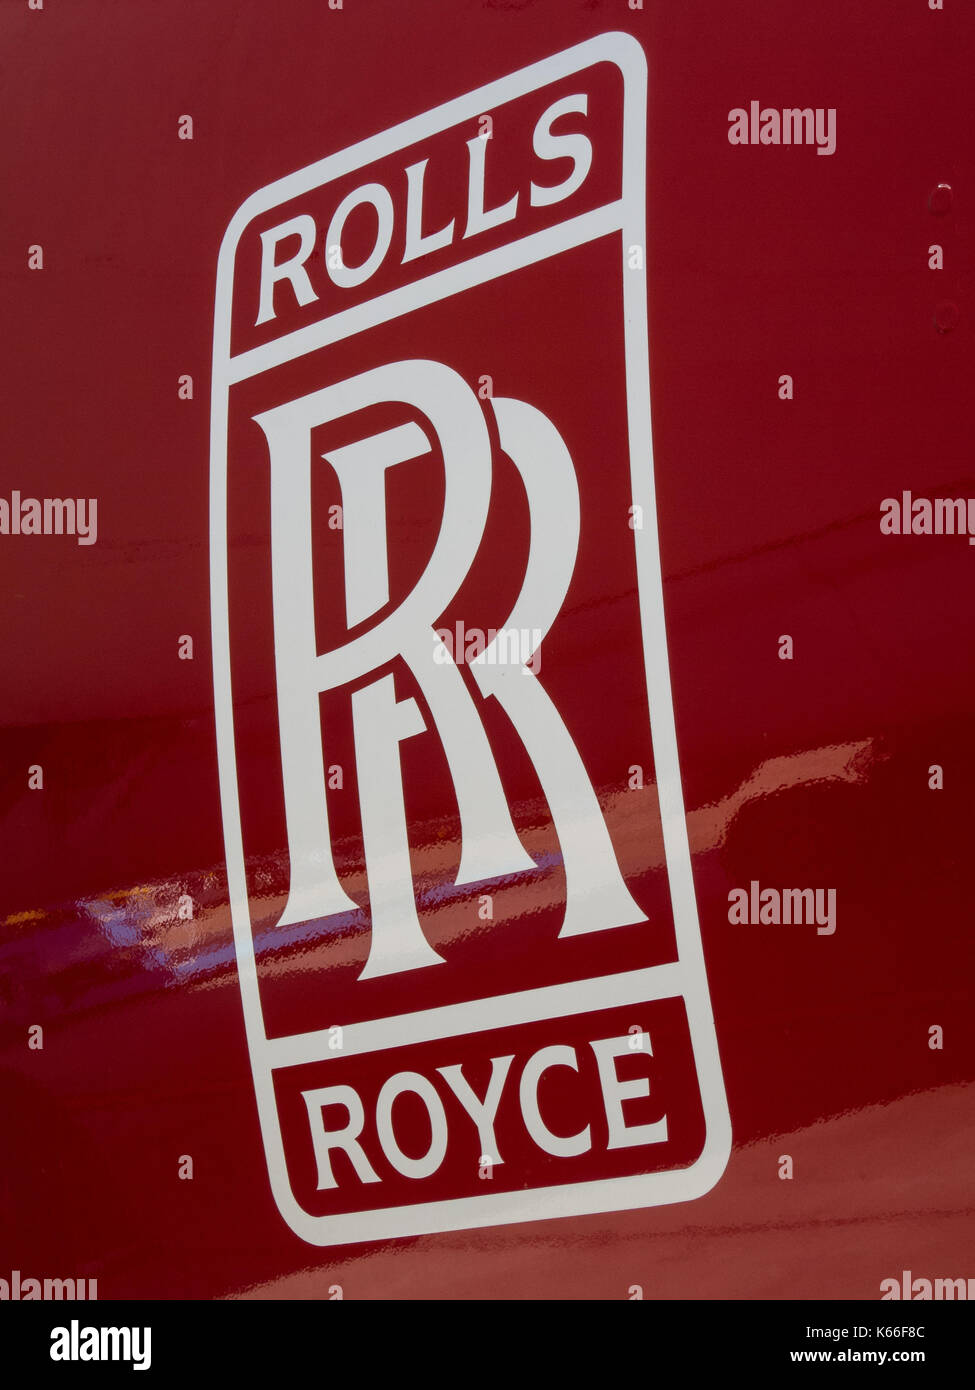 Rolls Royce logo on red aircraft engine Stock Photo